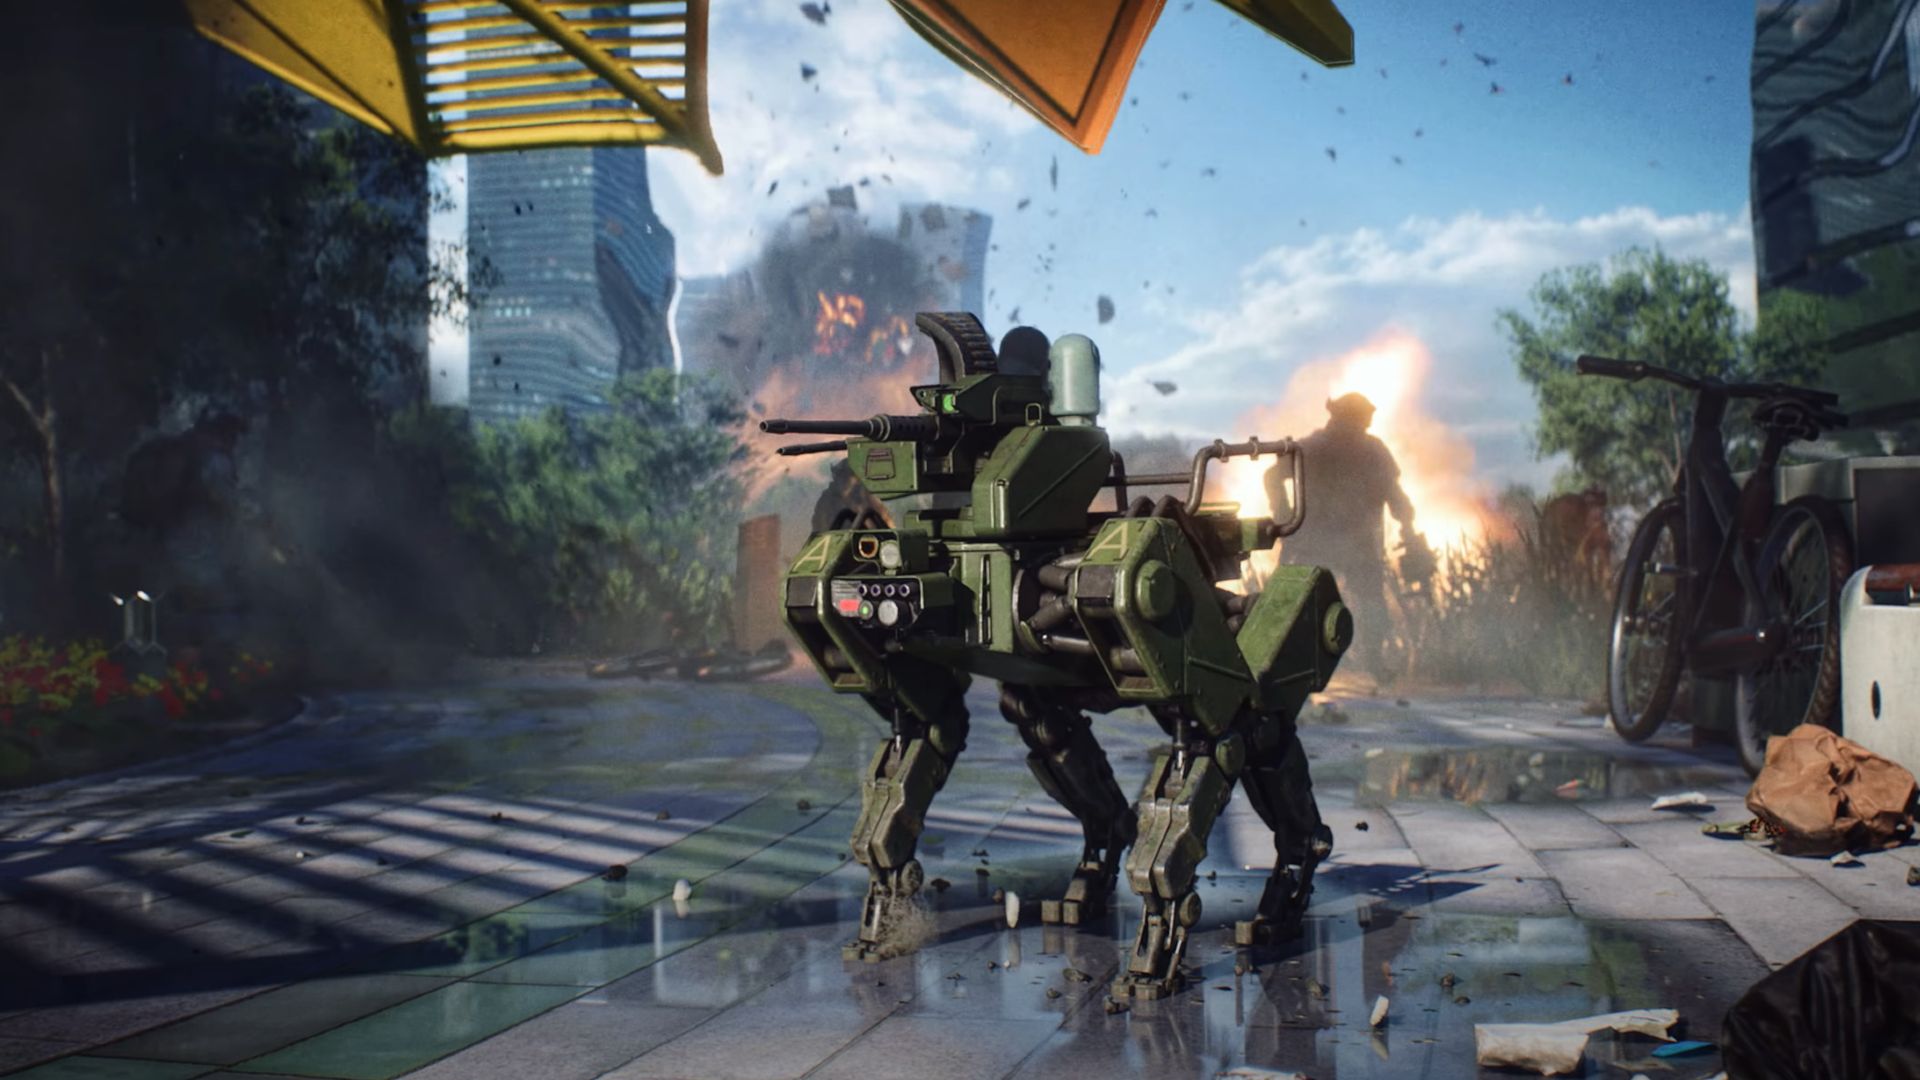 Nvidia announces DLSS and Reflex support for Battlefield 2042, but no ray tracing